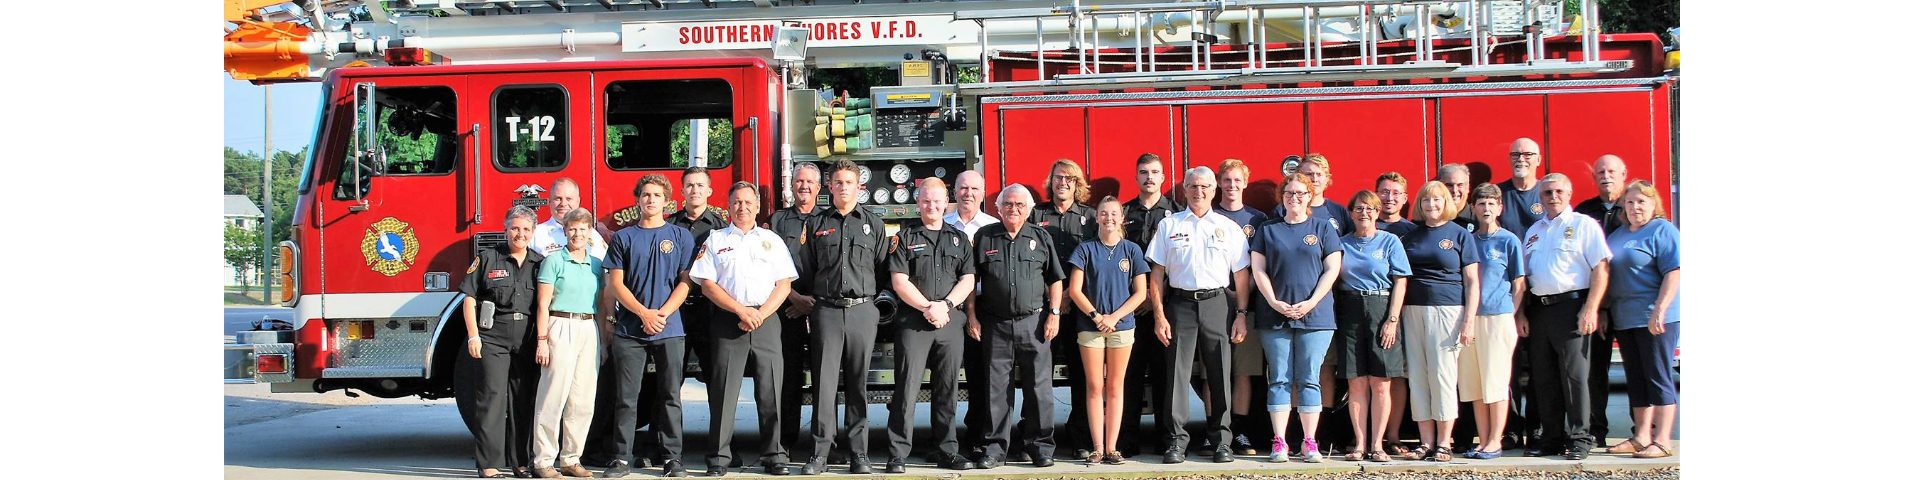 Southern Shores Volunteer Fire Department